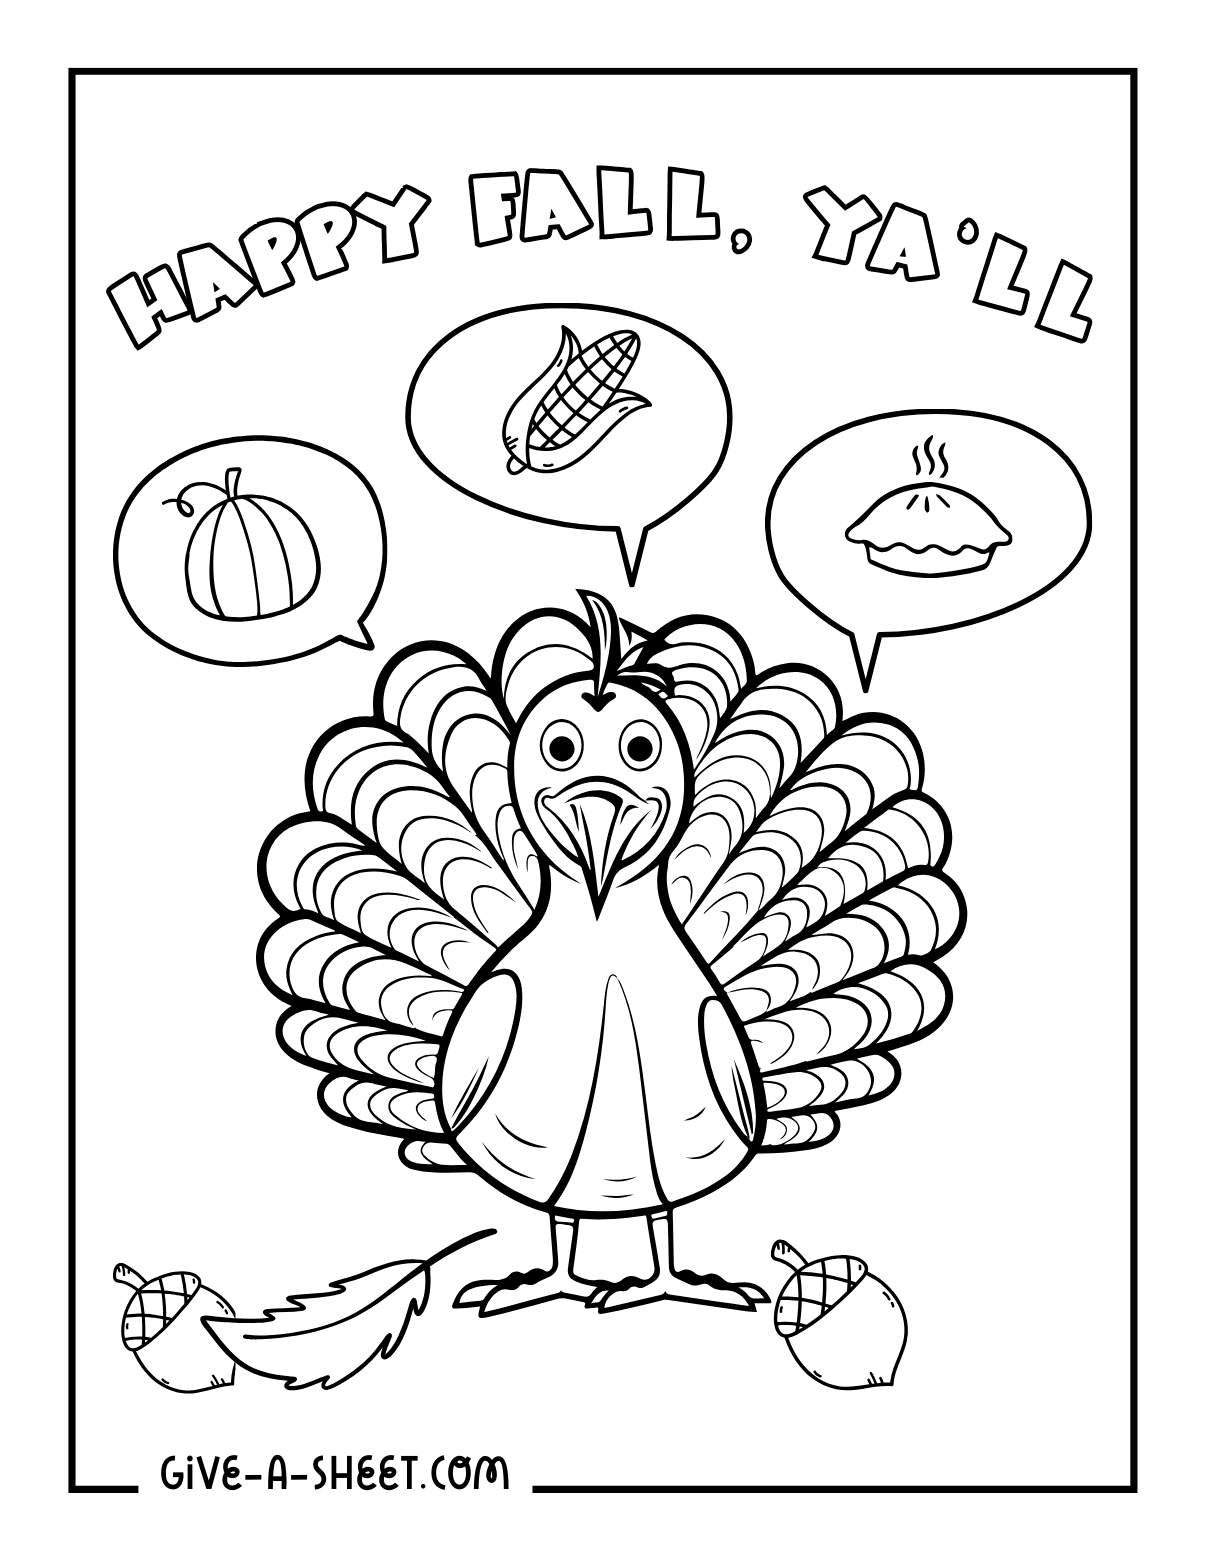 Turkey coloring page with pumpkin pie, corn thanksgiving meal to color.